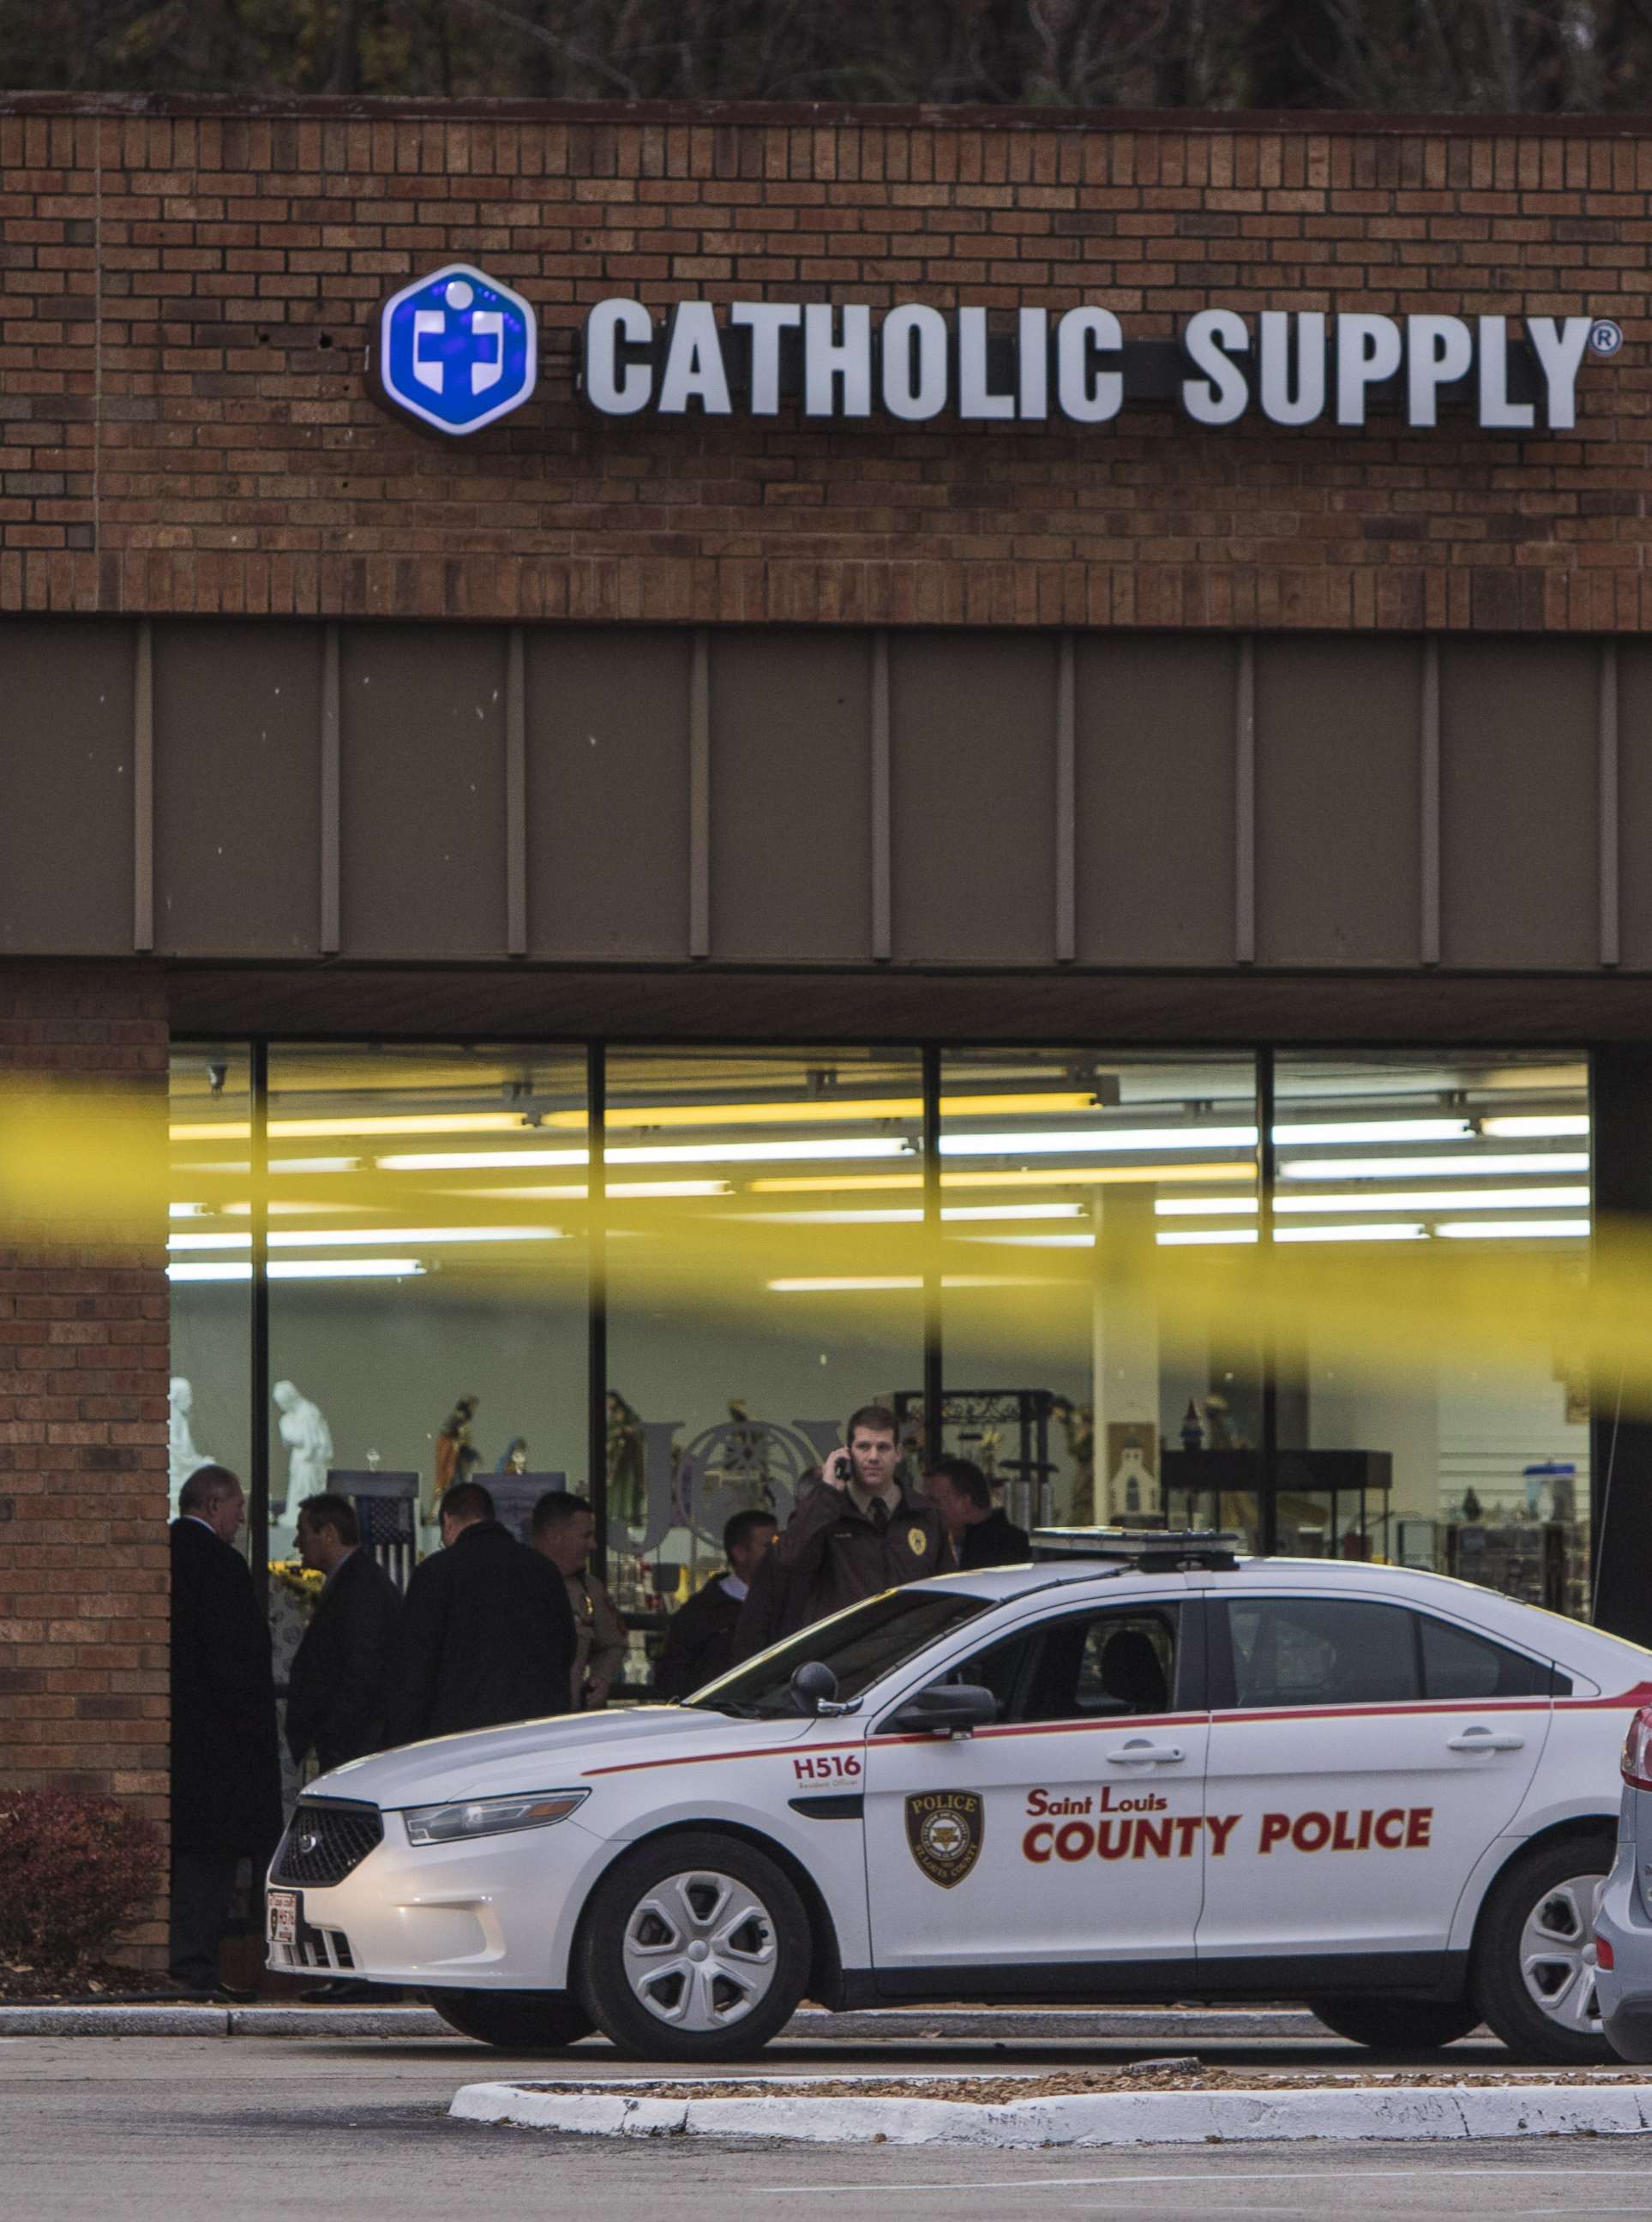 PHOTO: Police investigate at scene of an attack inside the Catholic Supply store in St. Louis on Nov. 19, 2018.